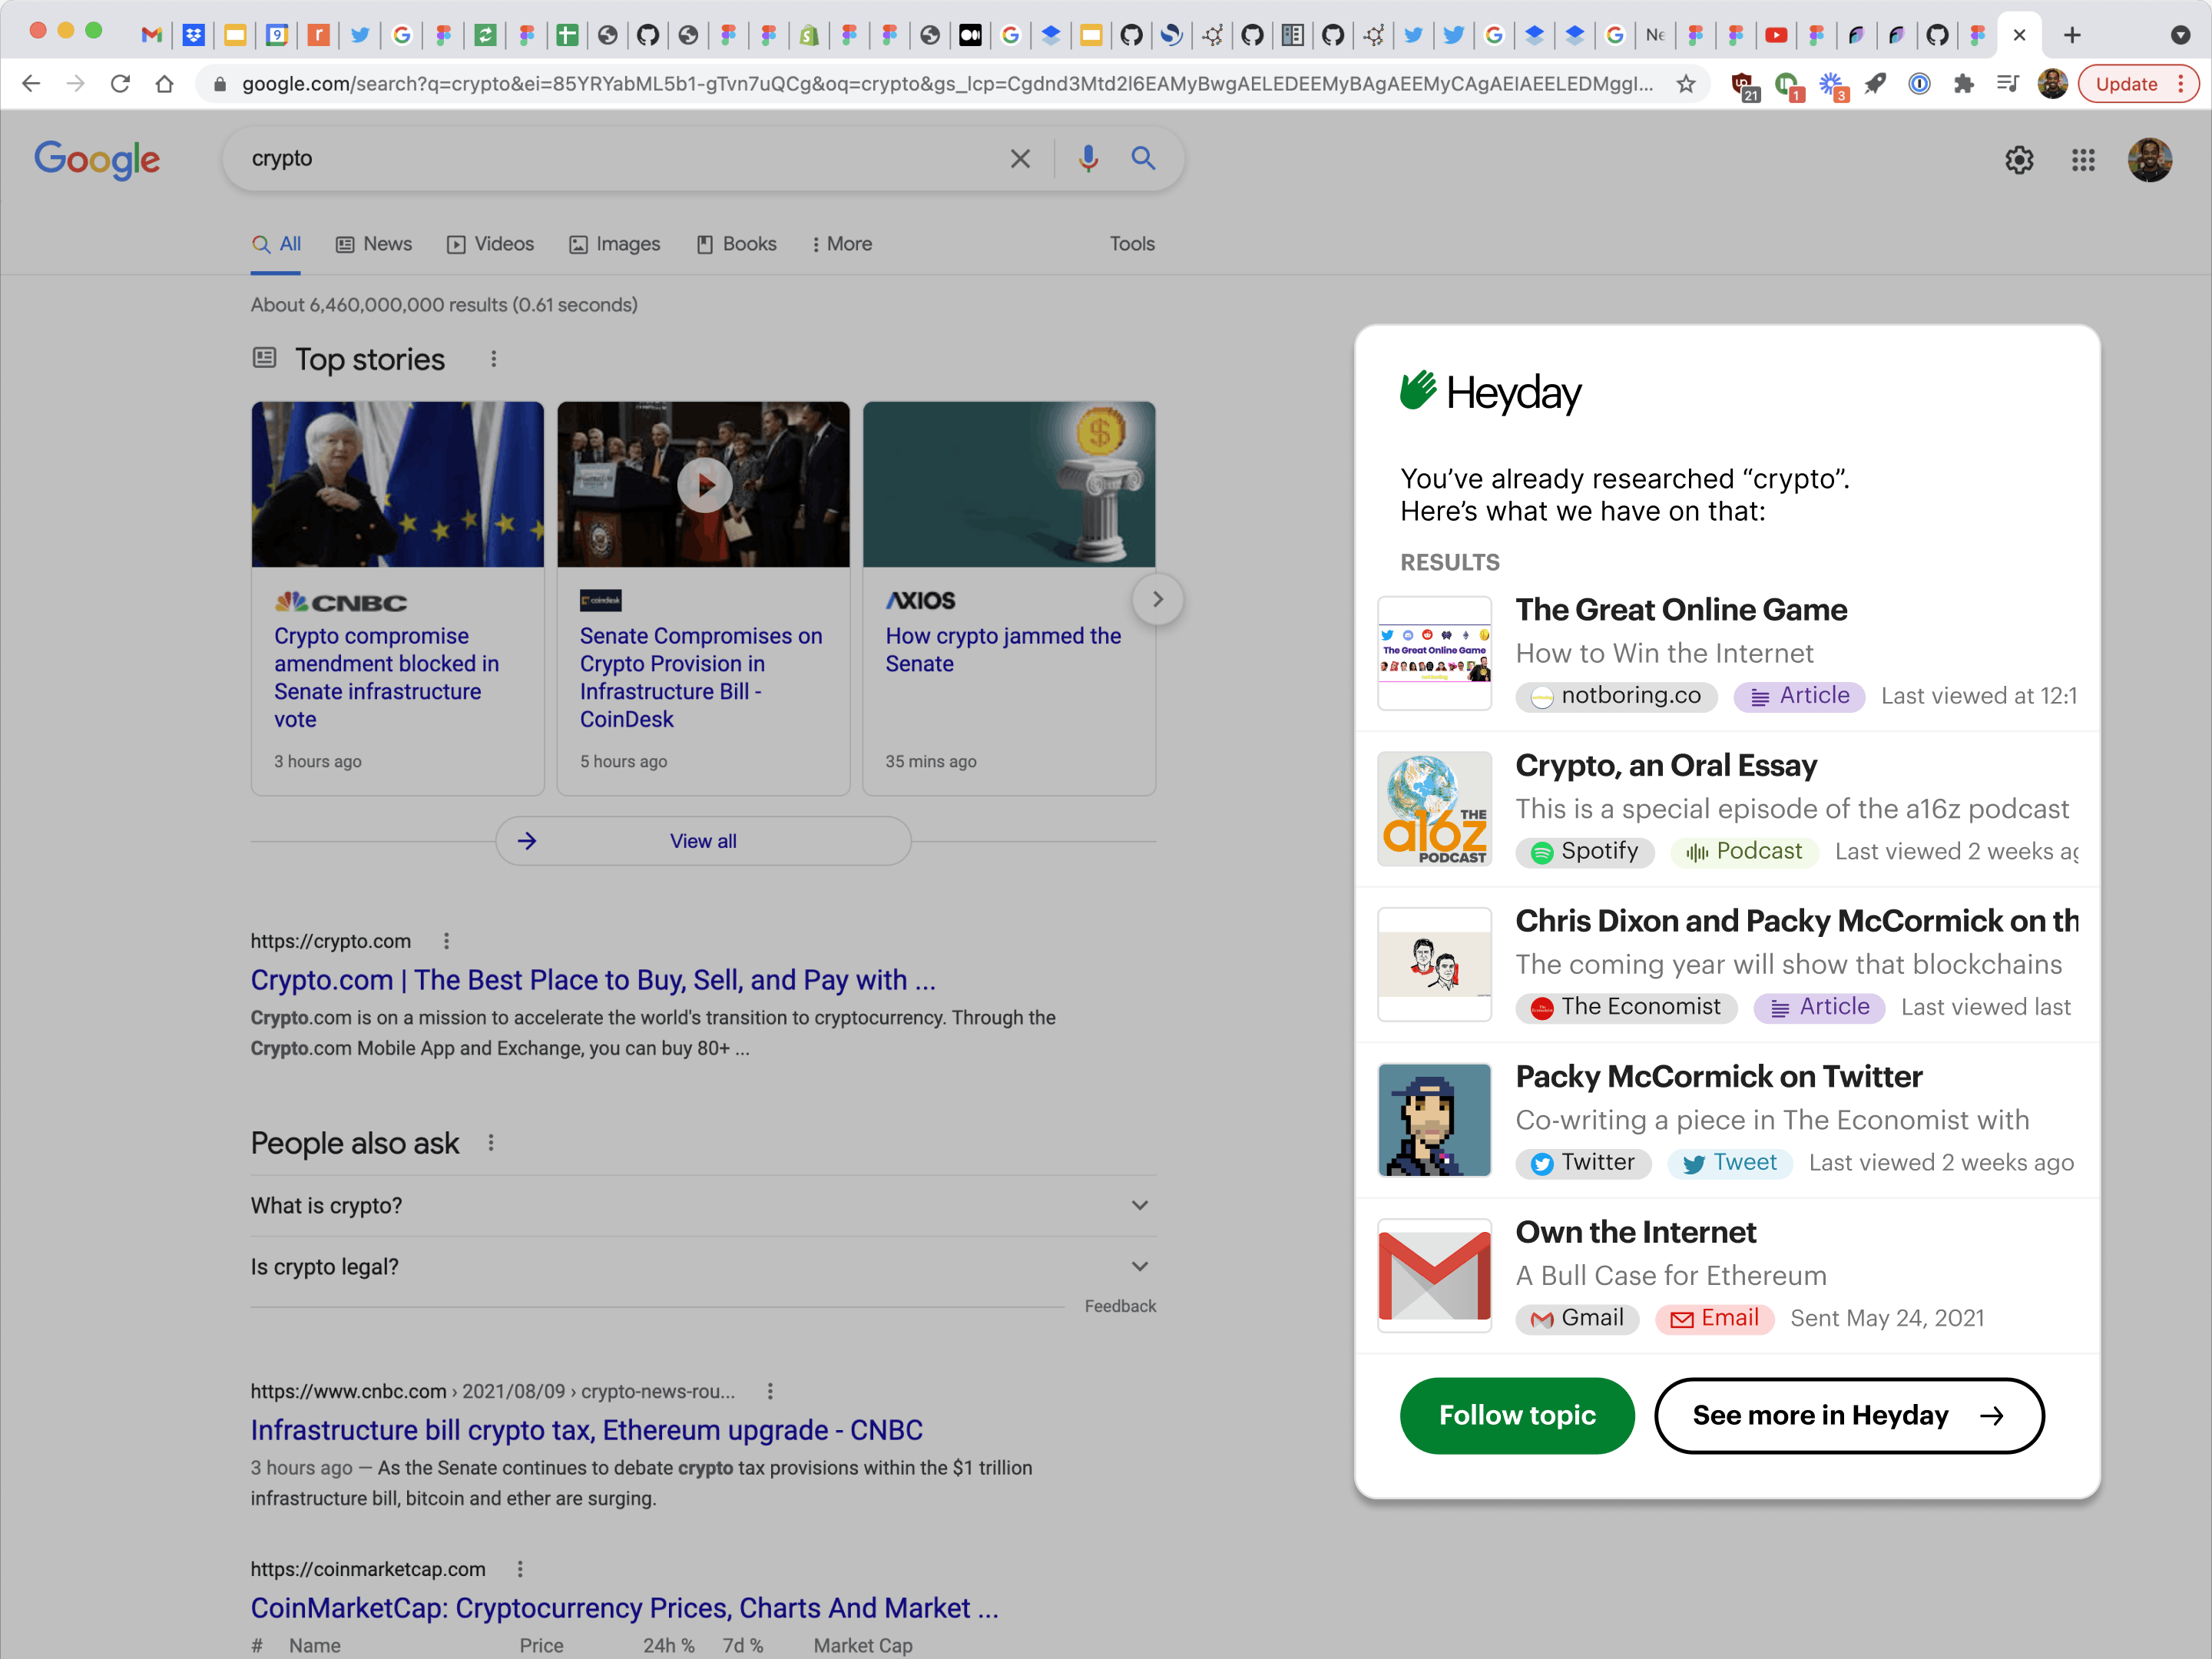 Chrome browser, Google Search Results, Heyday extension